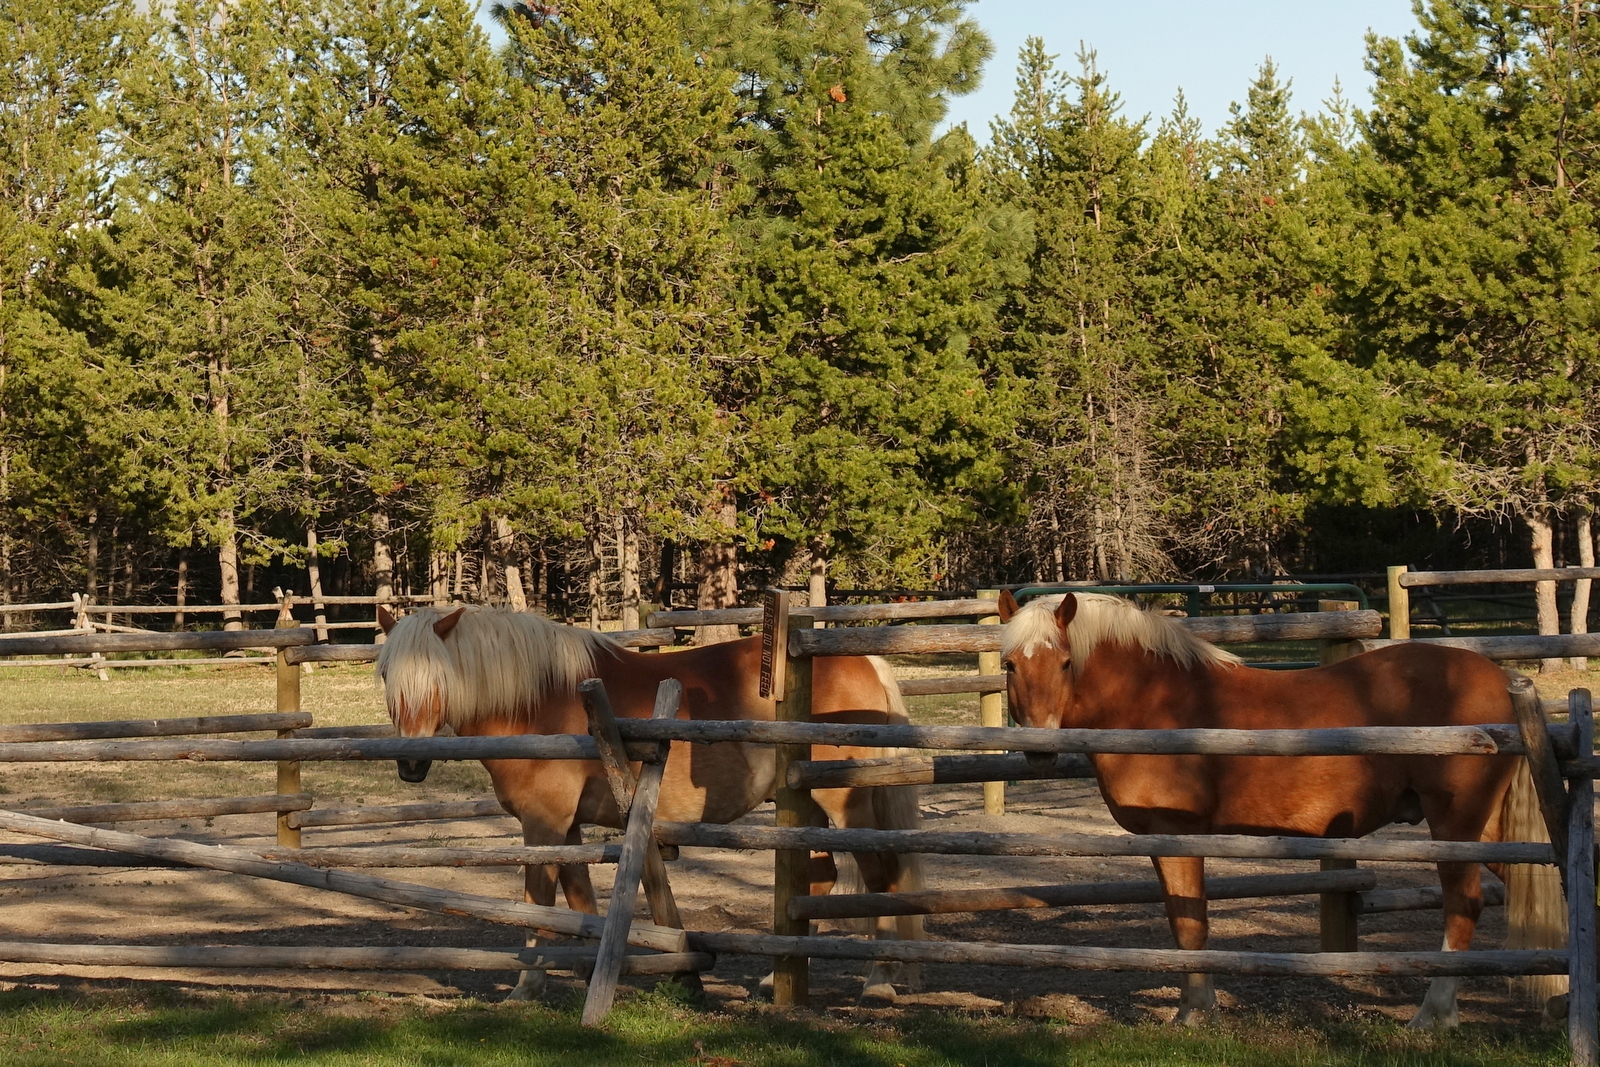 Two blond horses in adjoining corrals